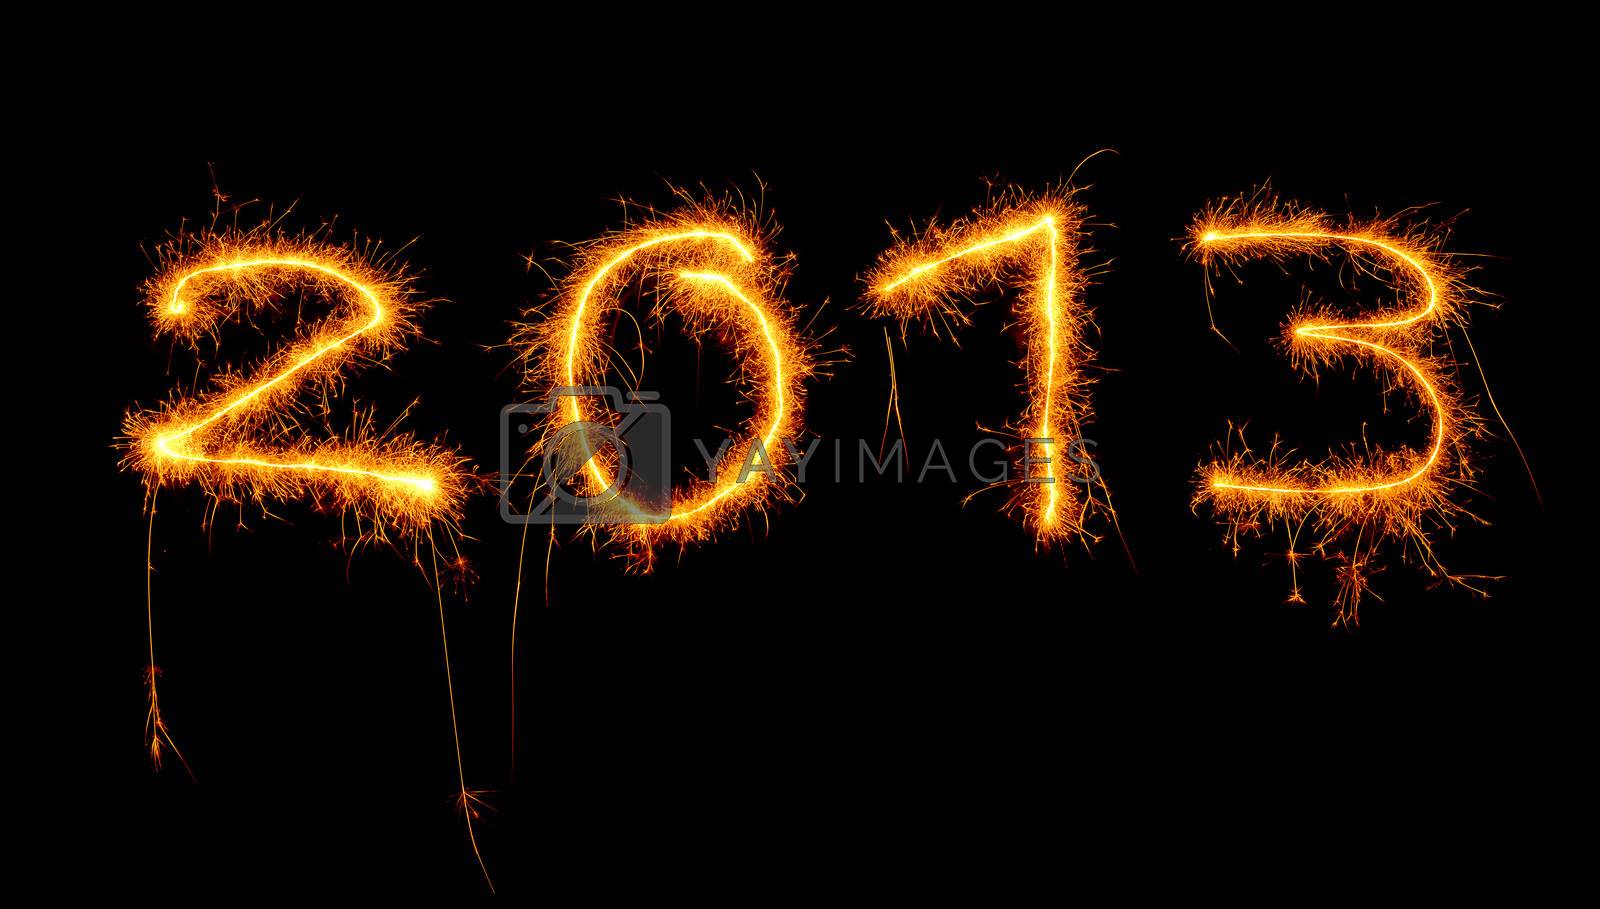 Royalty free image of 2013 New Year by Anna_Omelchenko